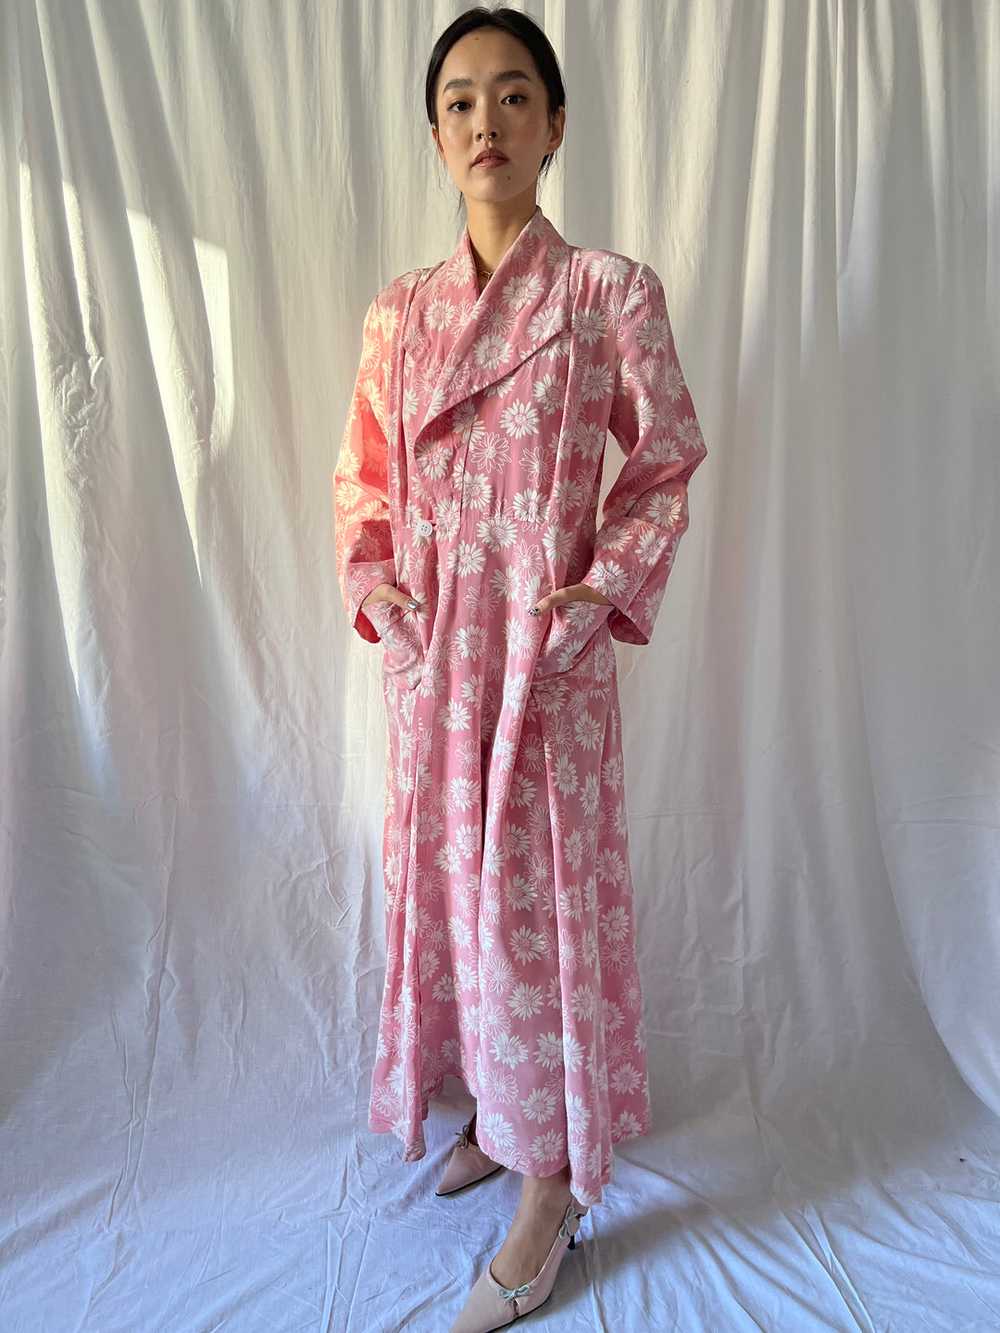 Vintage 1930s pink daisies gown robe - image 9